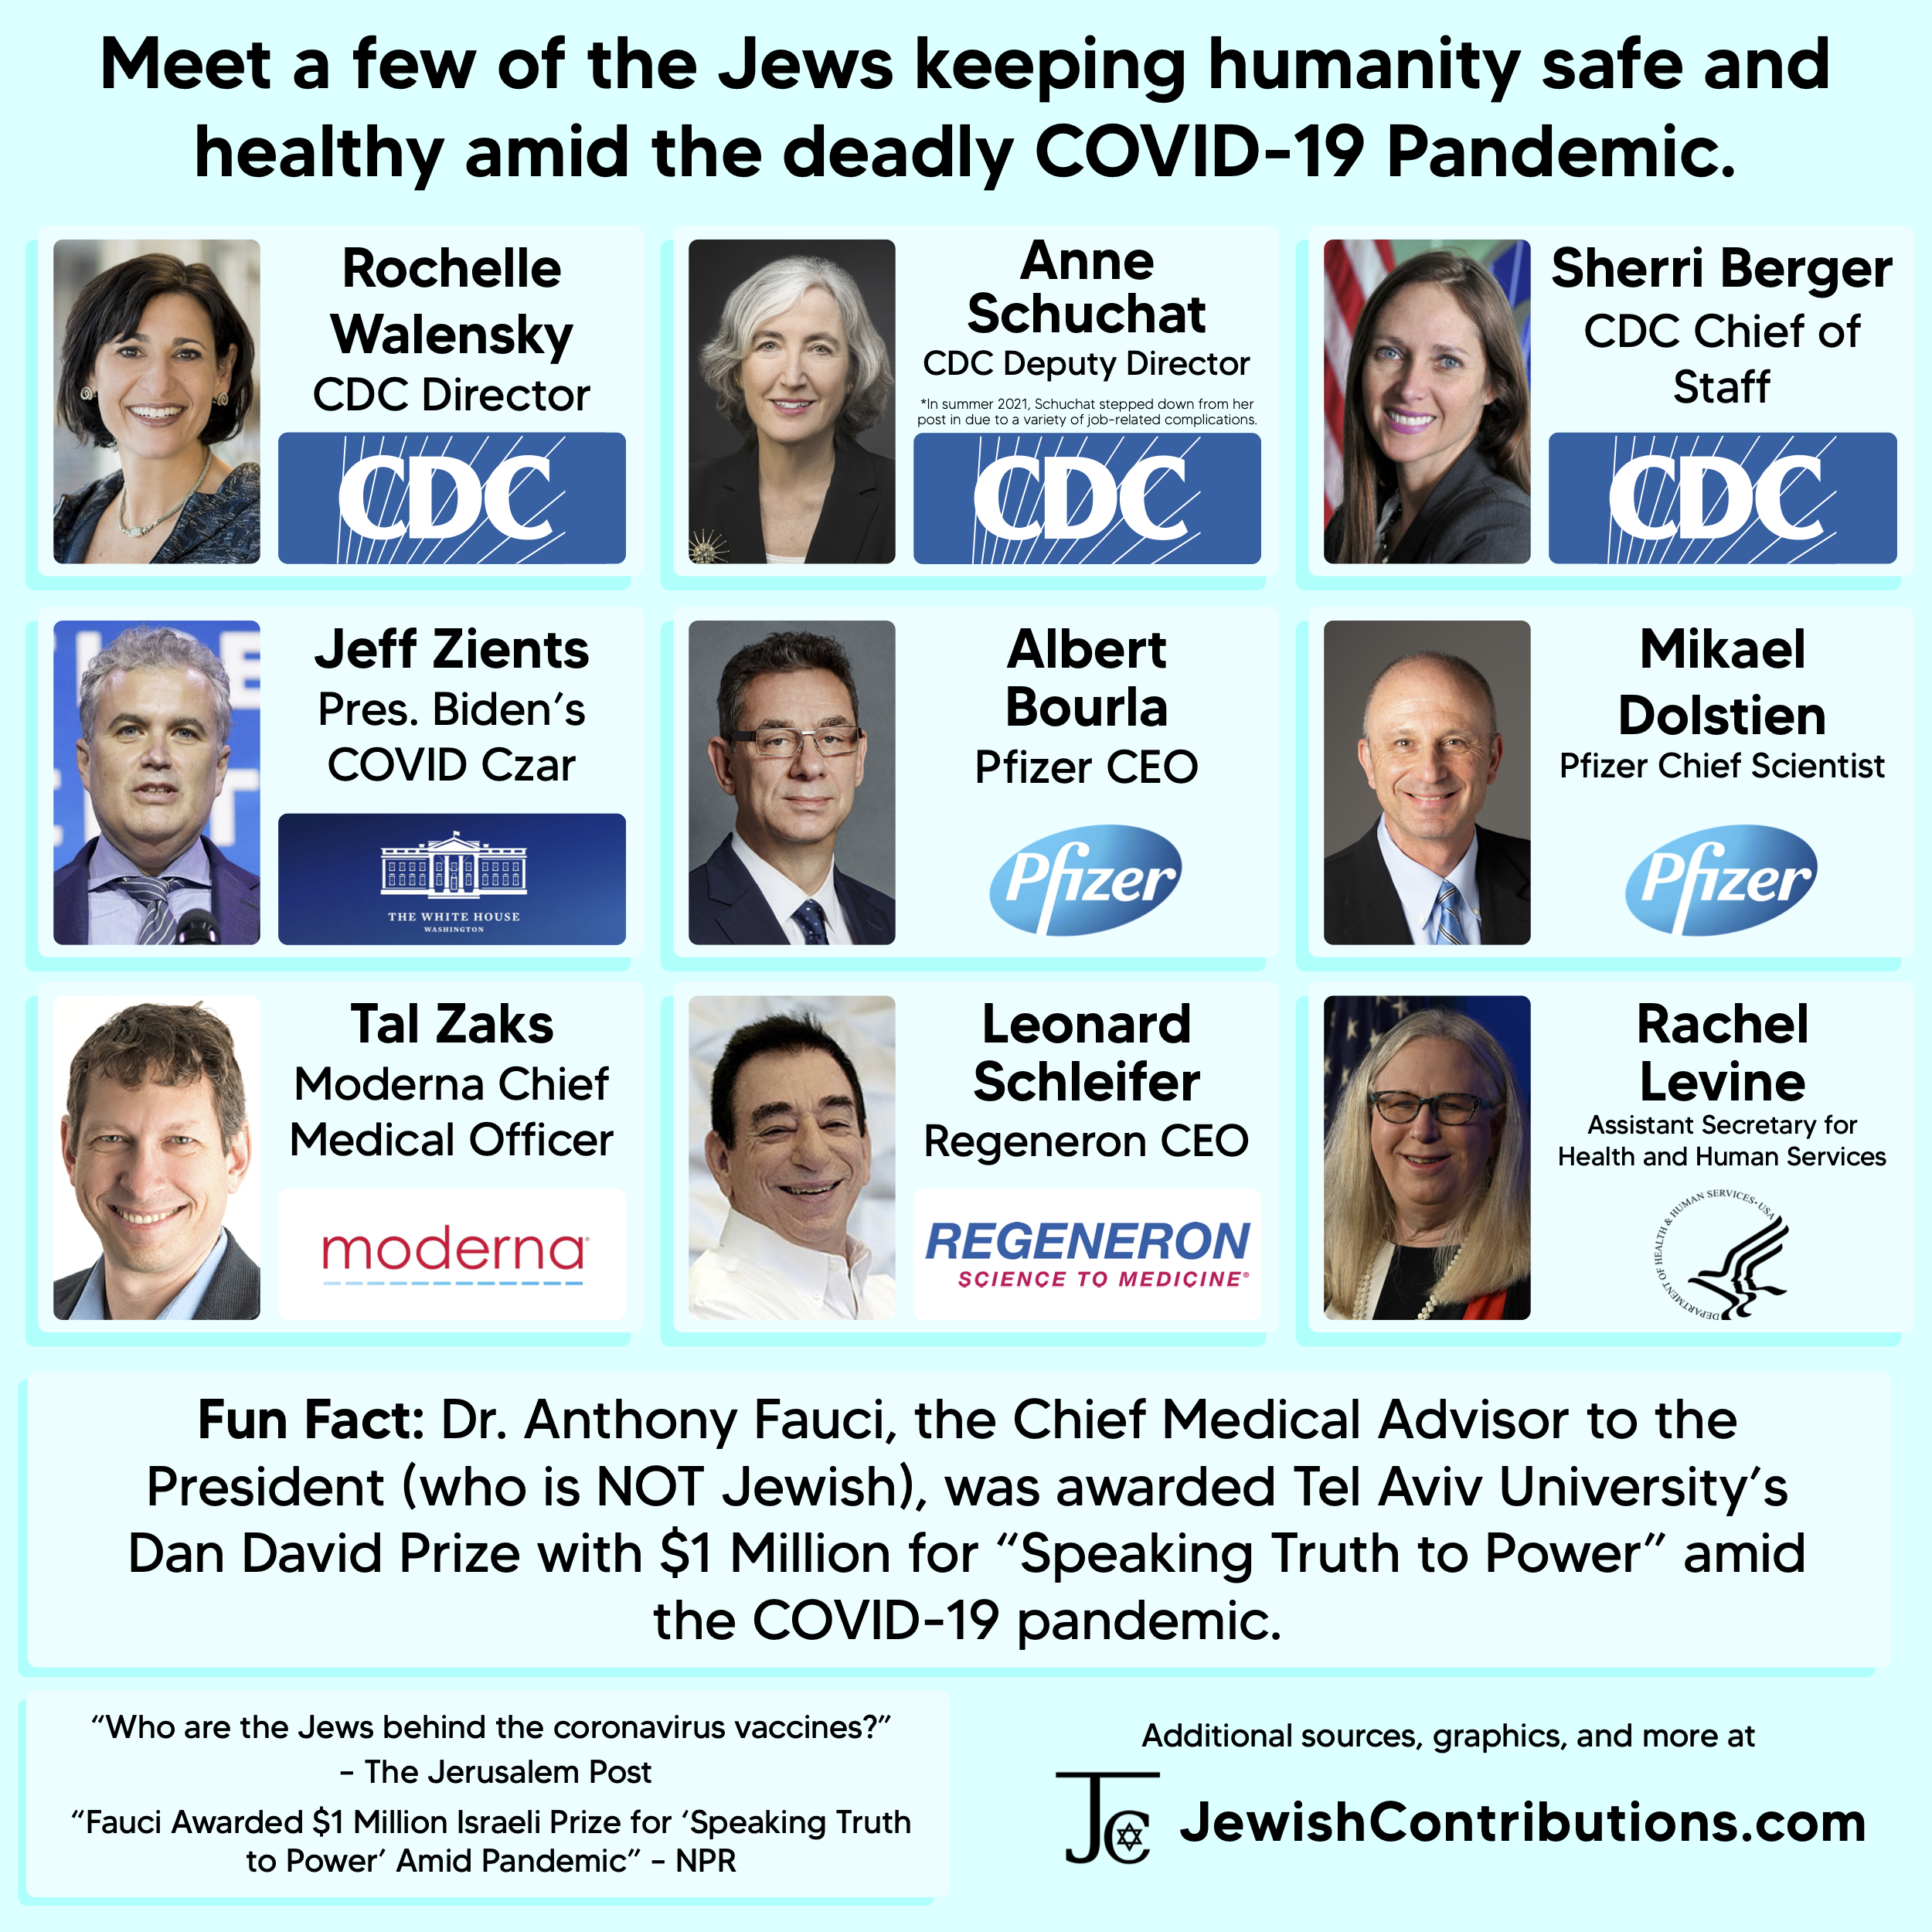 Meet a few of the Jews keeping humanity safe and healthy amid the deadly COVID-19 pandemic.